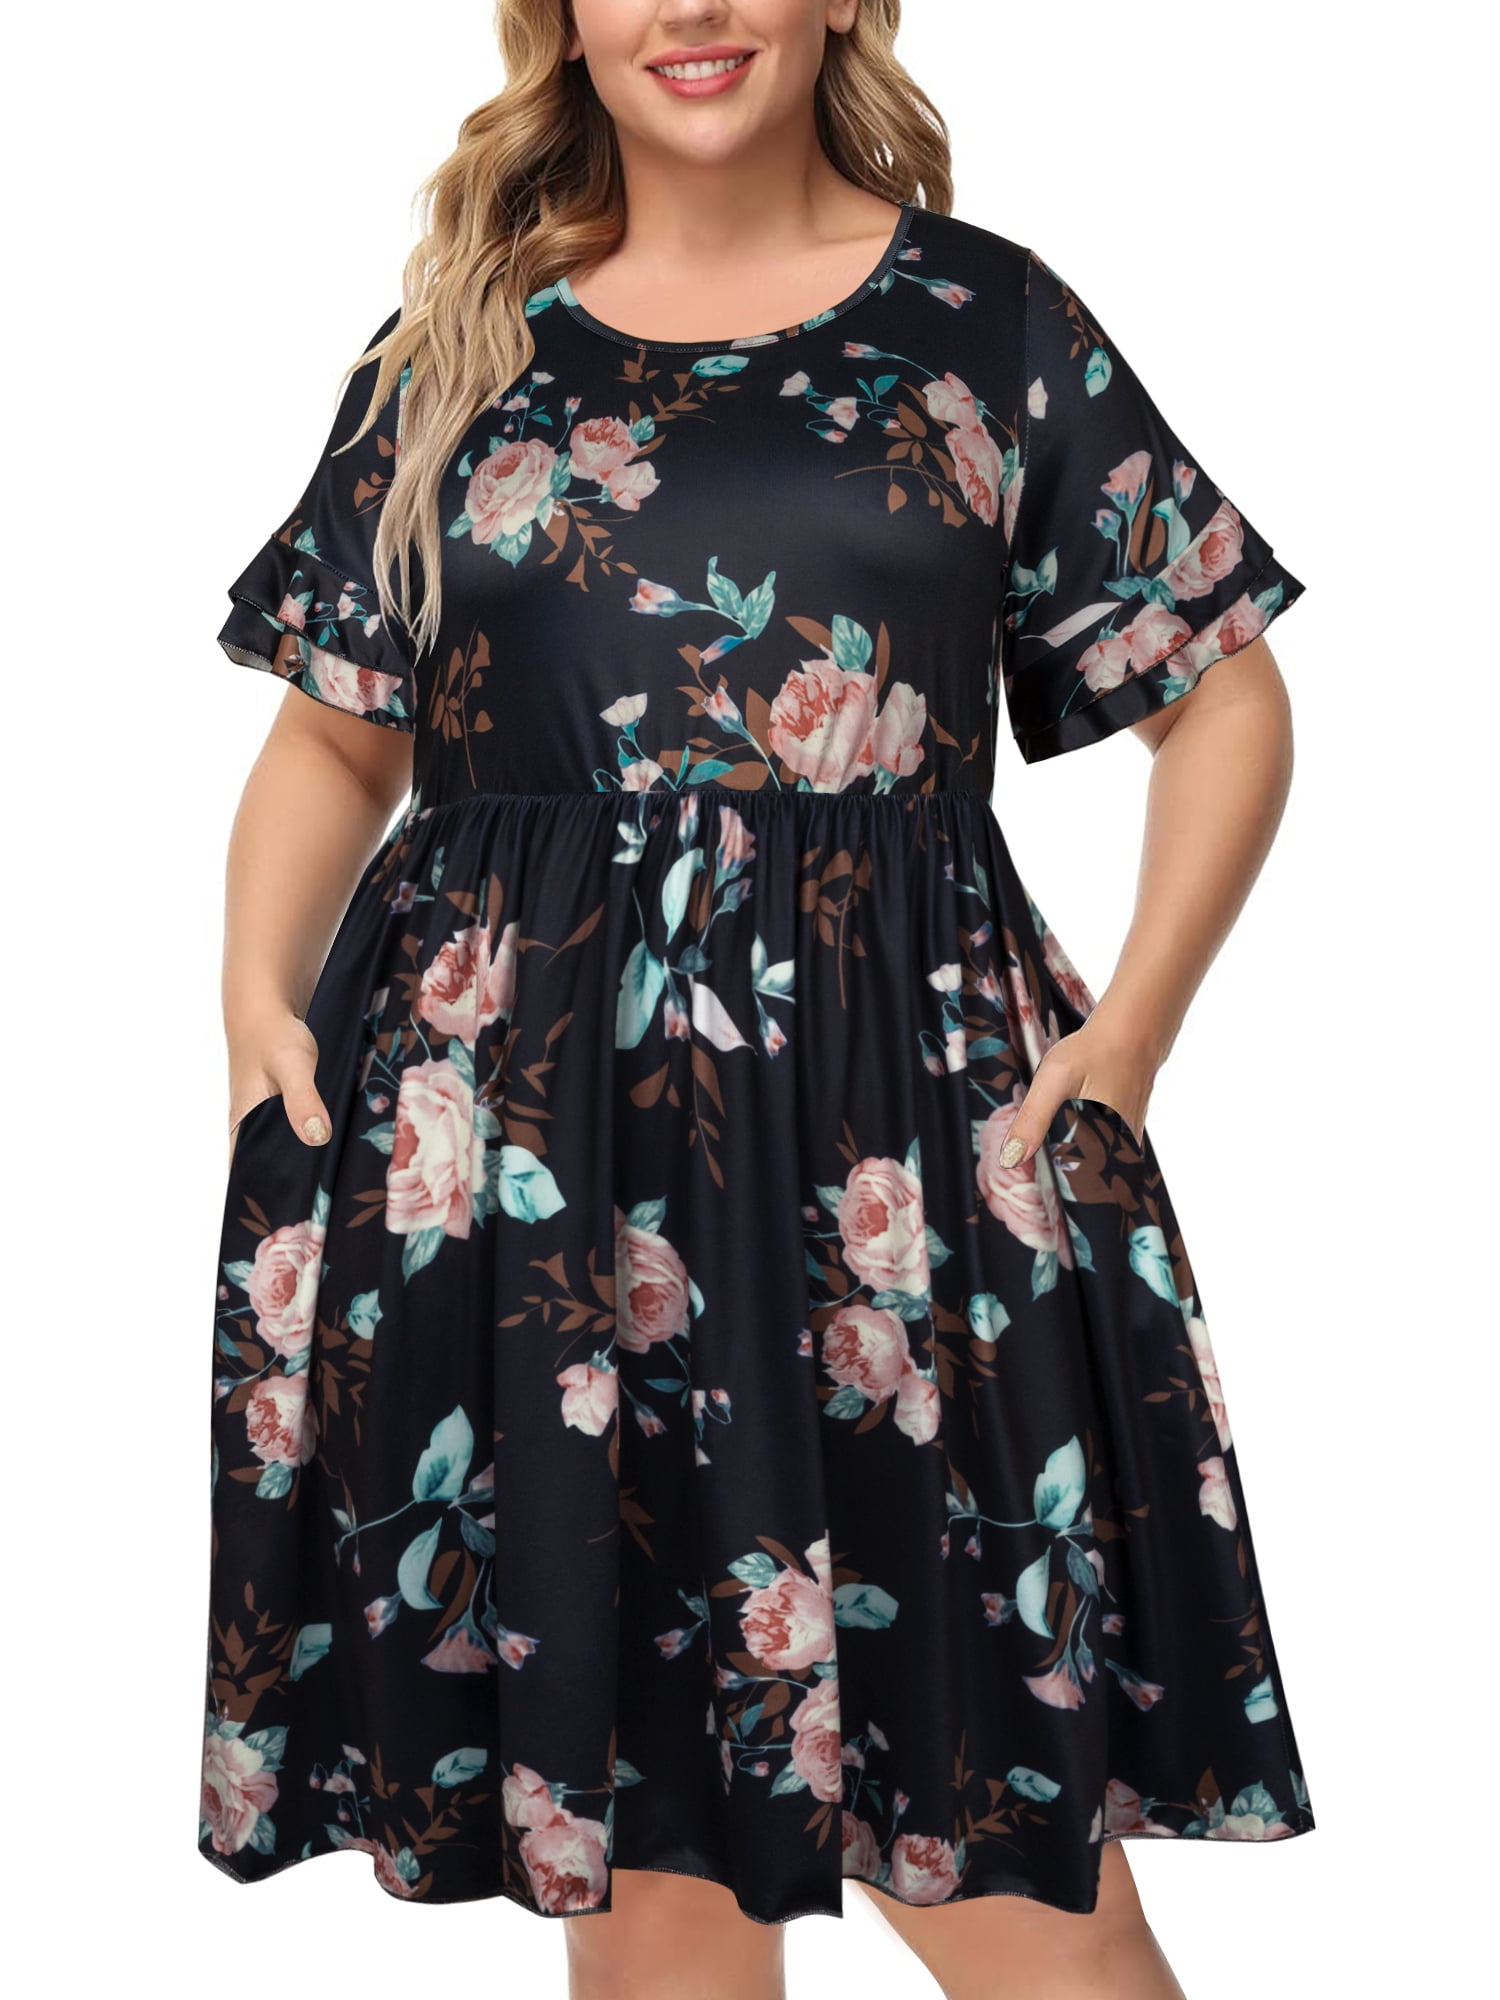 Chama Women's Plus Size Short Sleeve Casual Dress A-Line and Flare ...